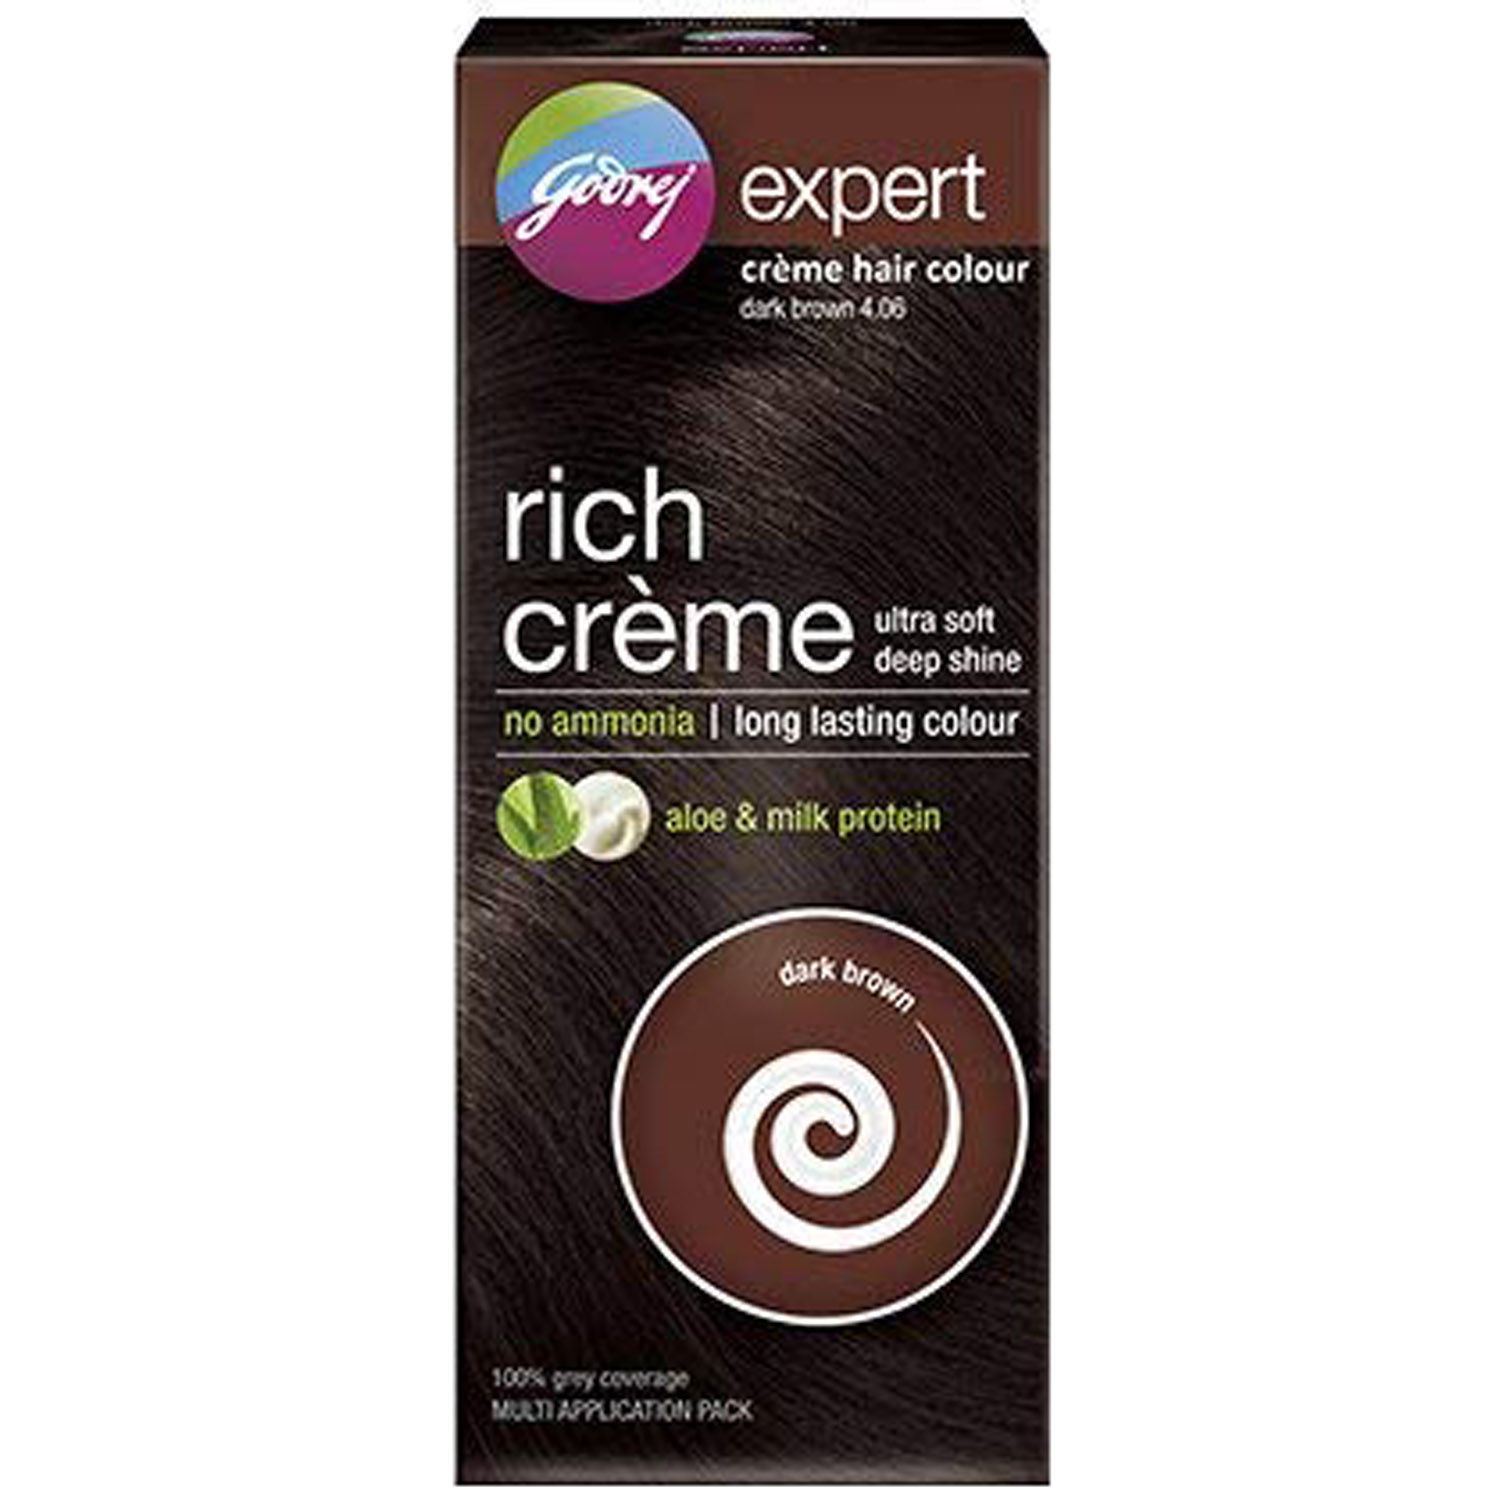 Godrej Expert Rich Cr?e Hair Colour, Dark Brown 50 gm Price, Uses, Side  Effects, Composition - Apollo Pharmacy